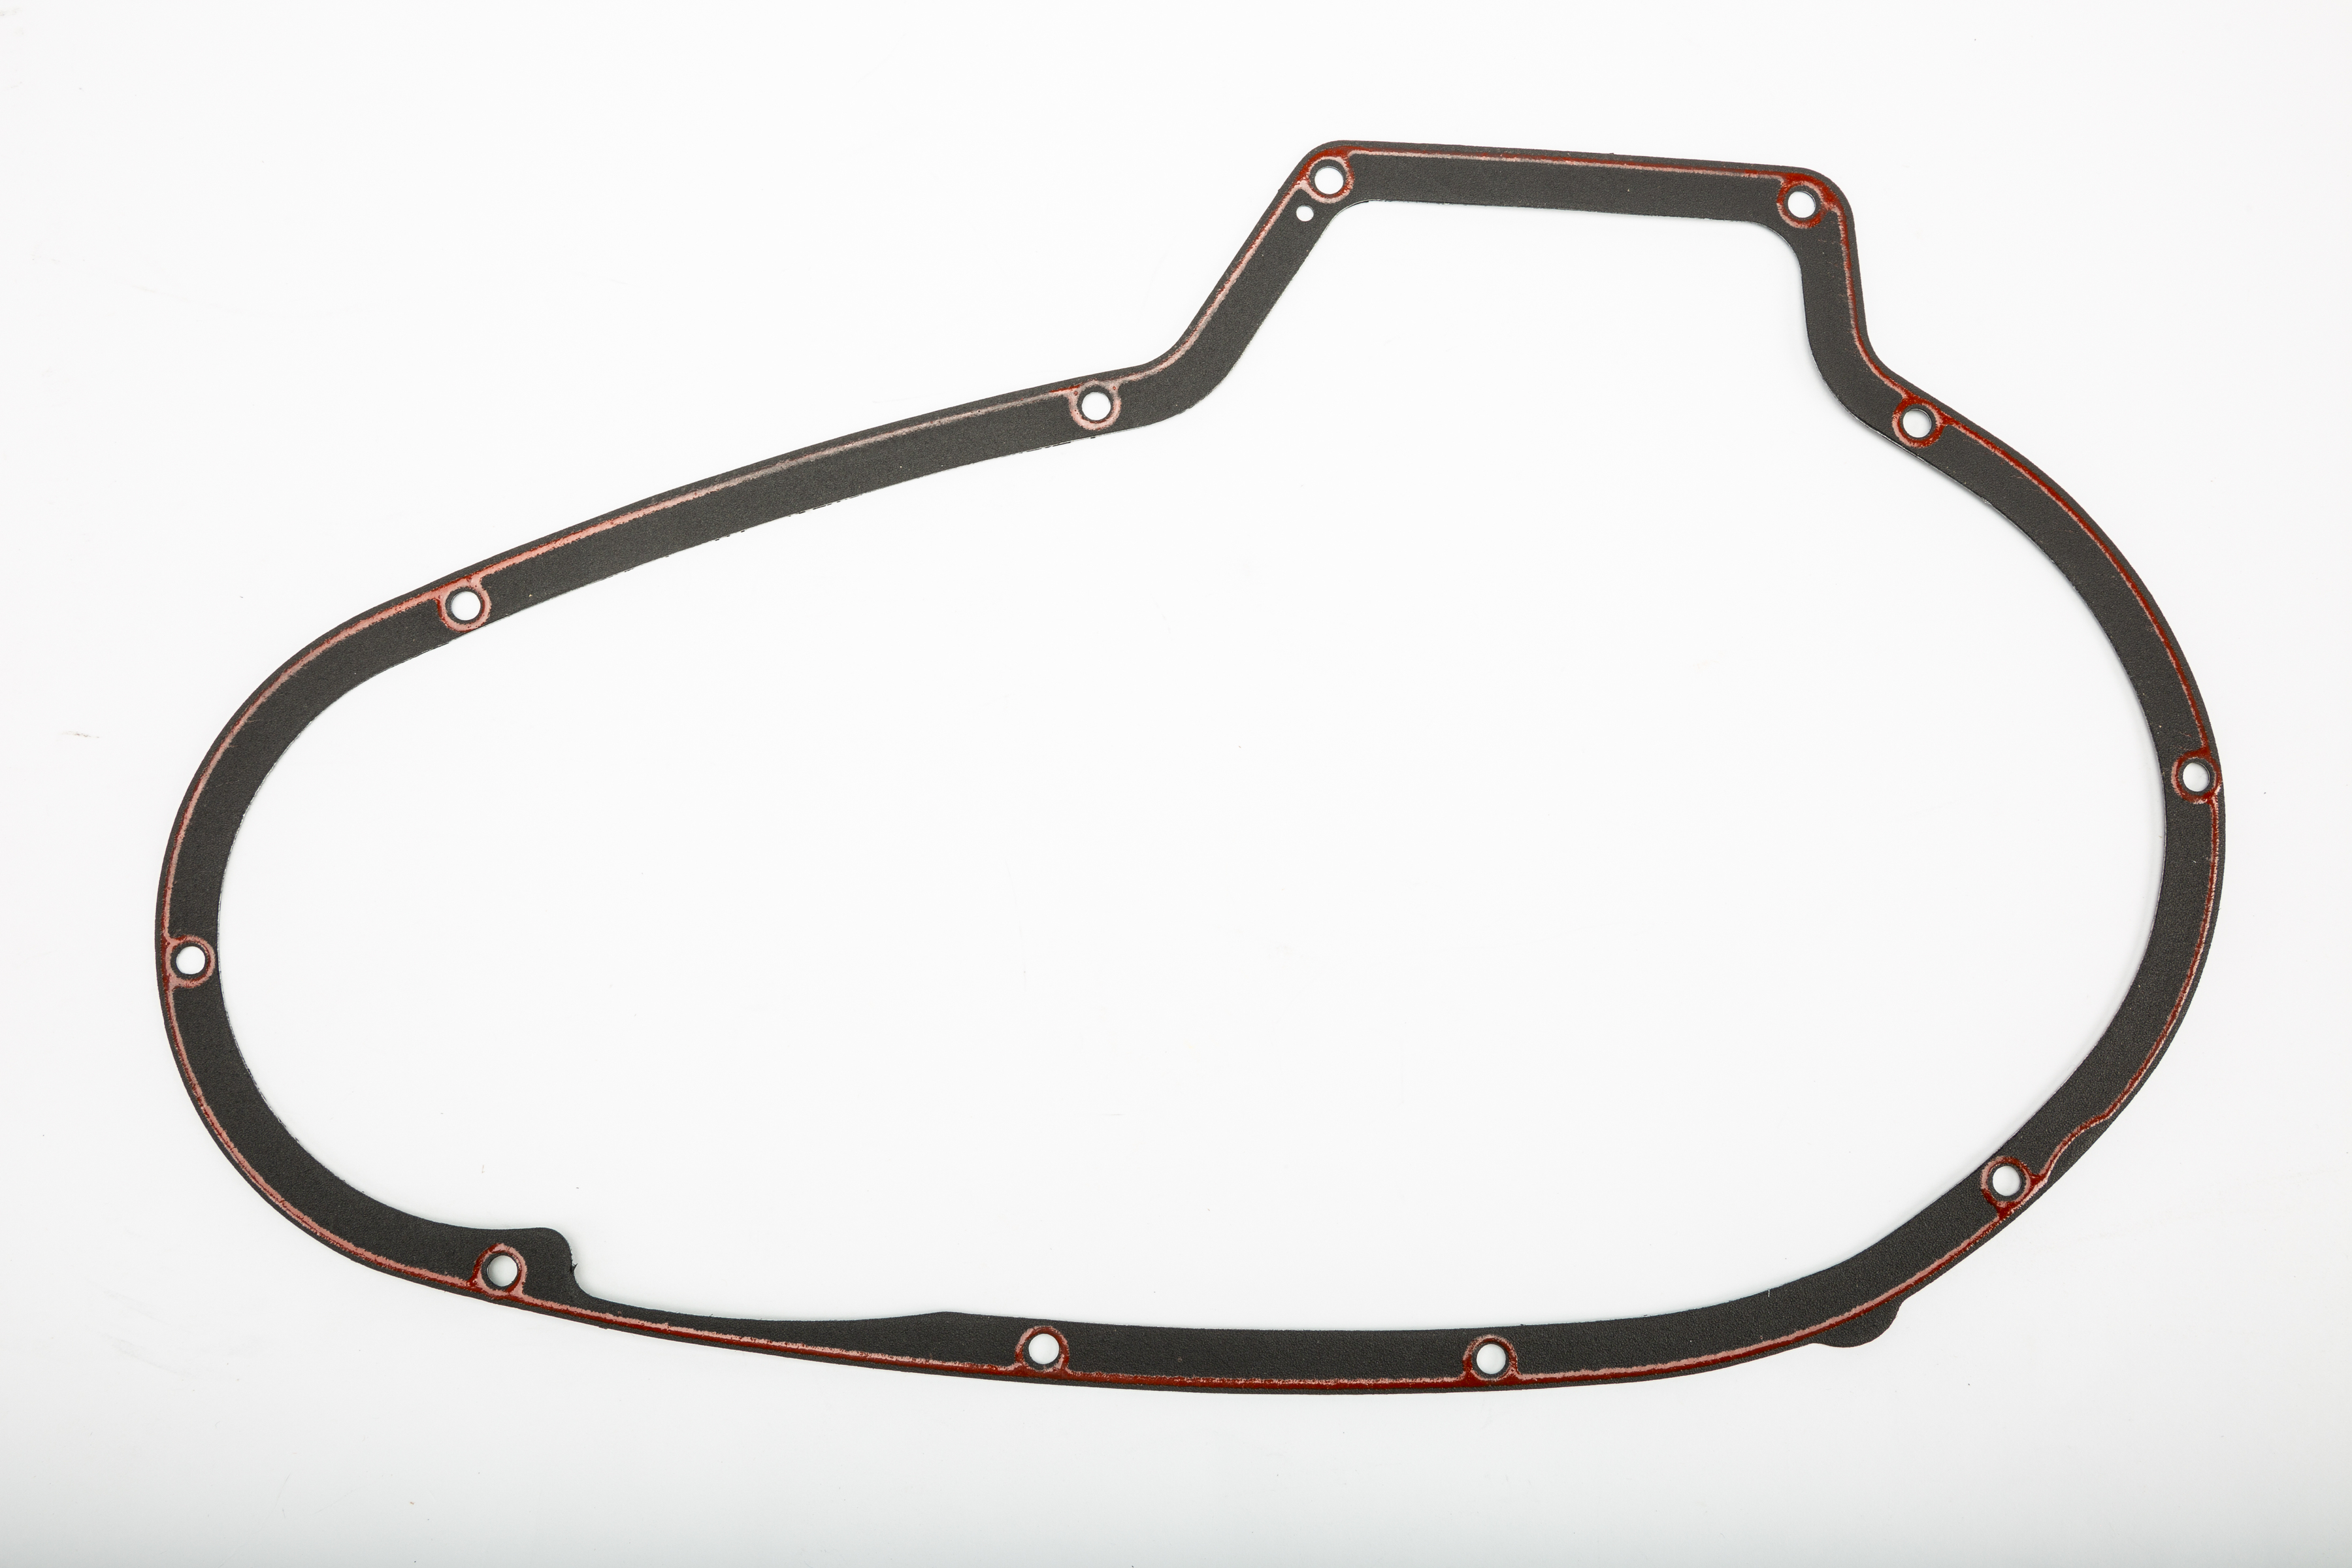 Primary Cover Gasket Foam - For 72-76 Harley XLH1000 - Click Image to Close